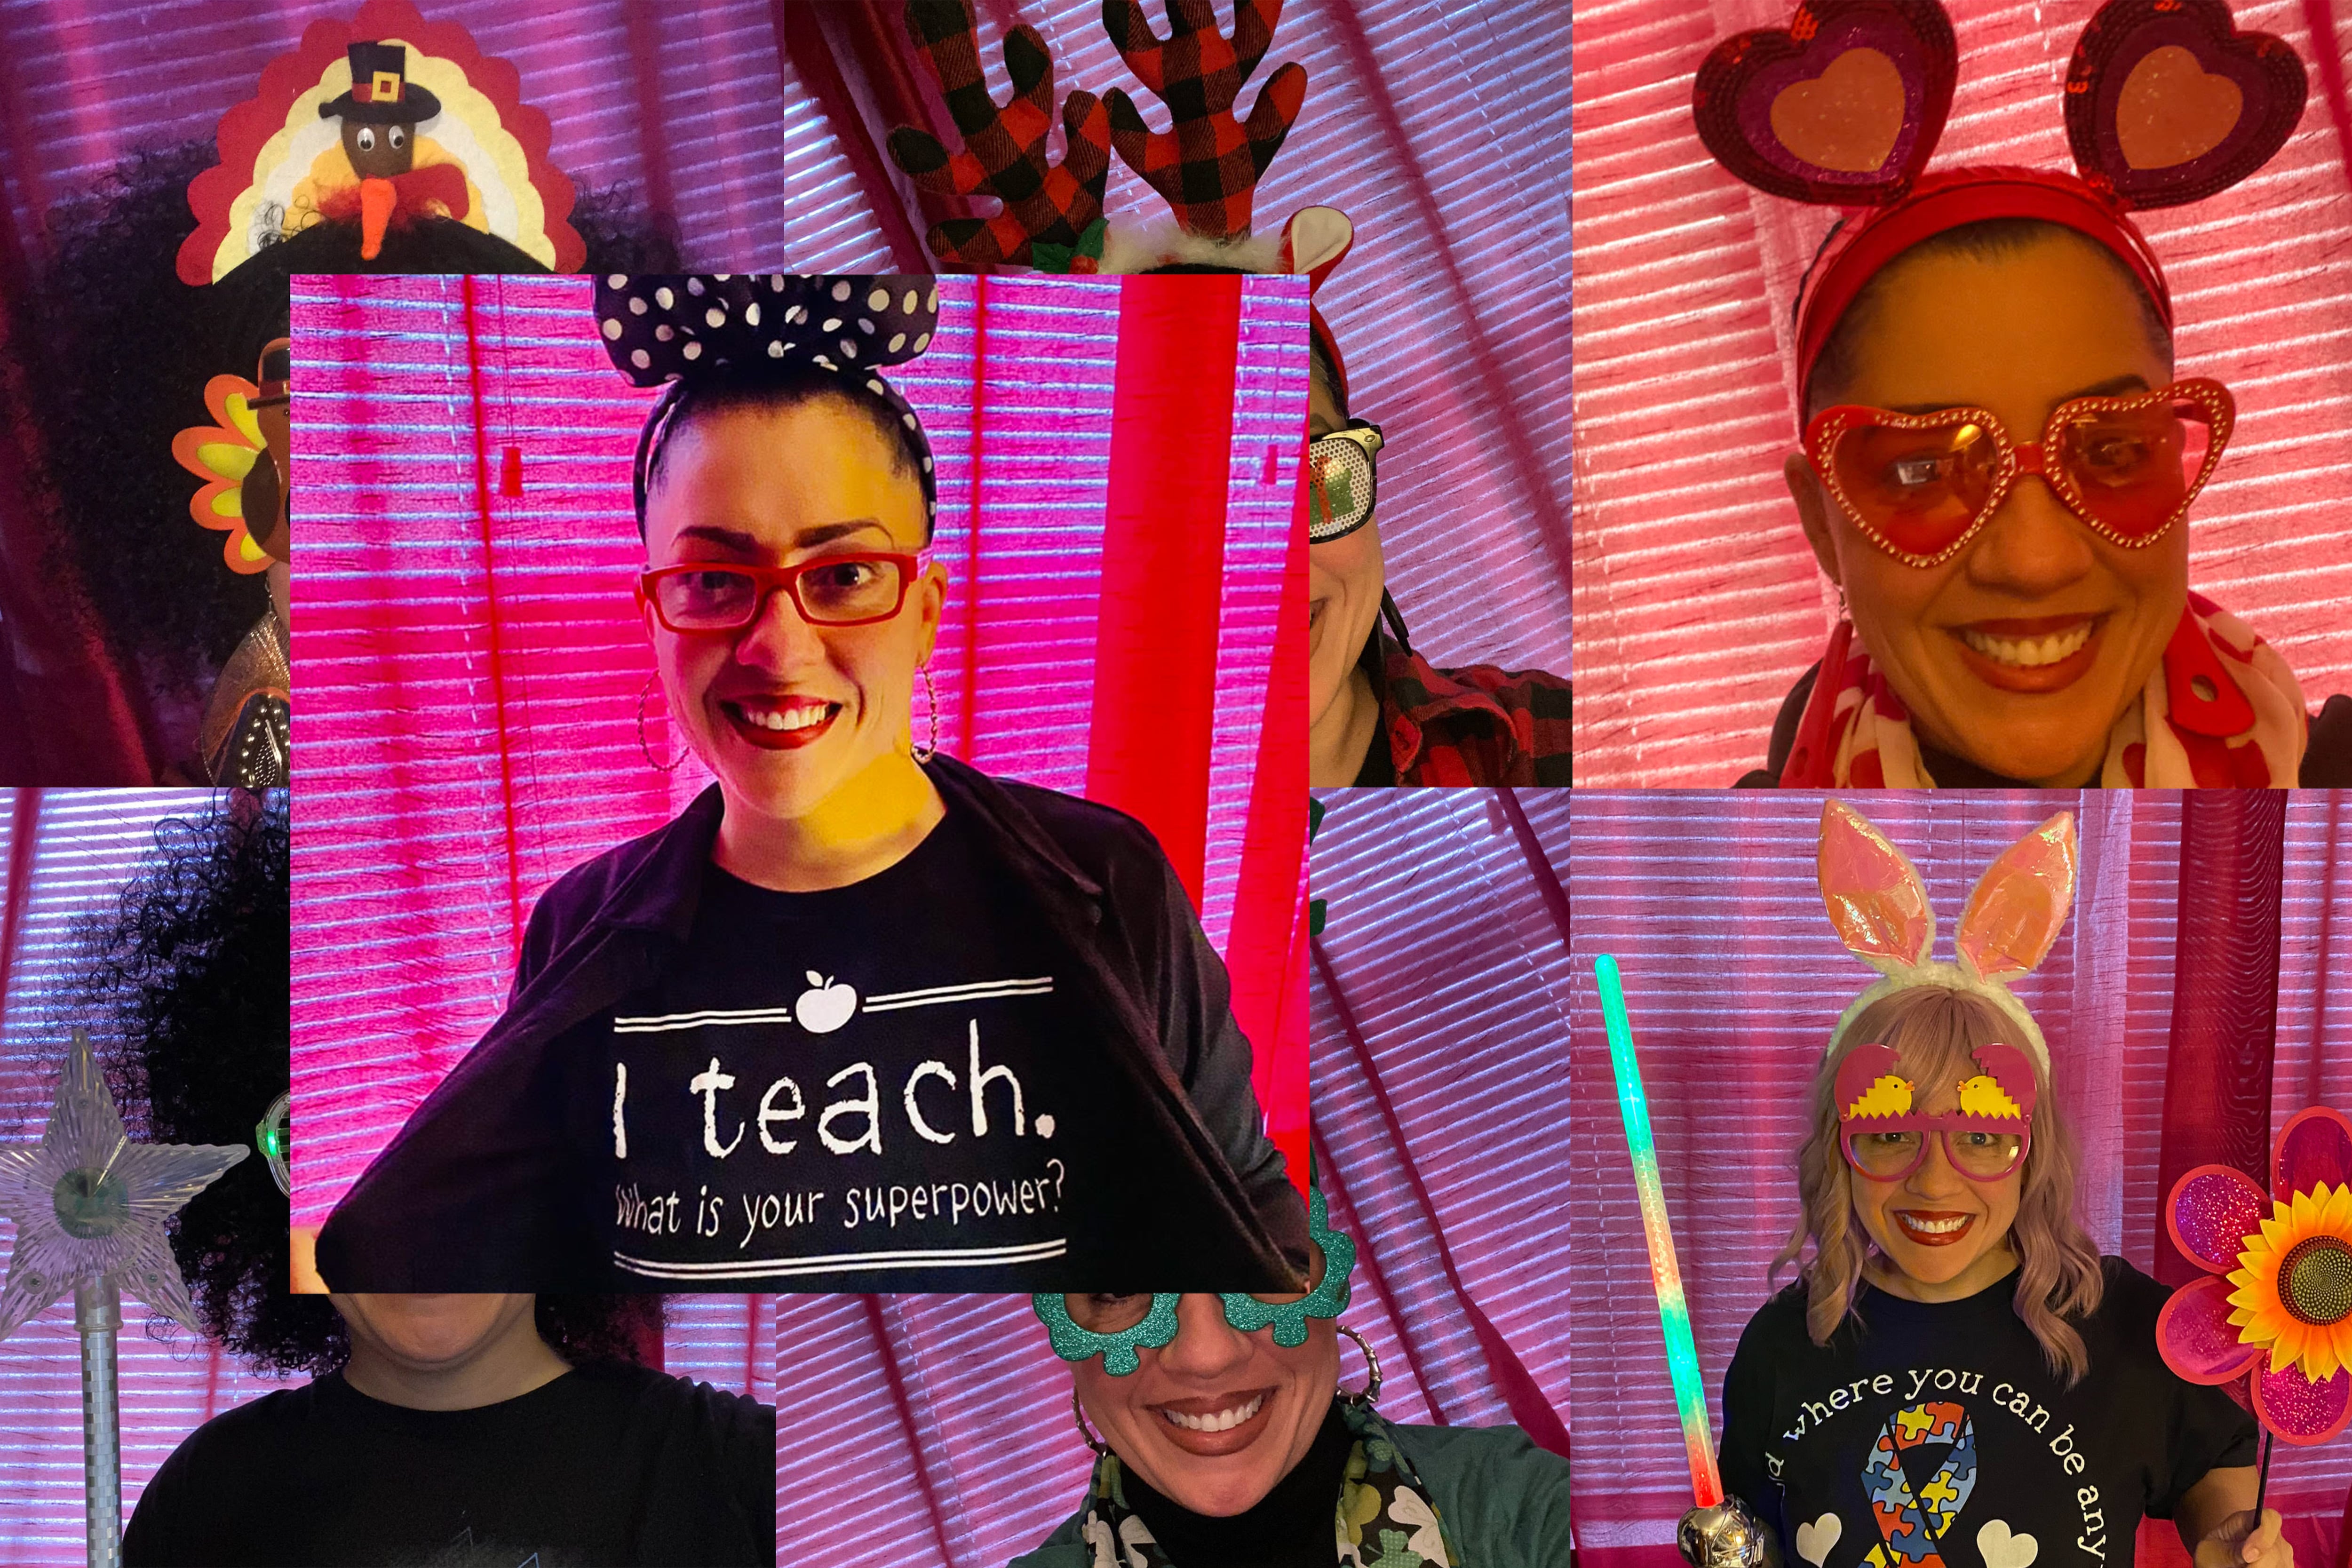 A multi-photo collage of Newark teacher Milybet Montijo-Cepeda, who uses a variety of outfits to engage her students.